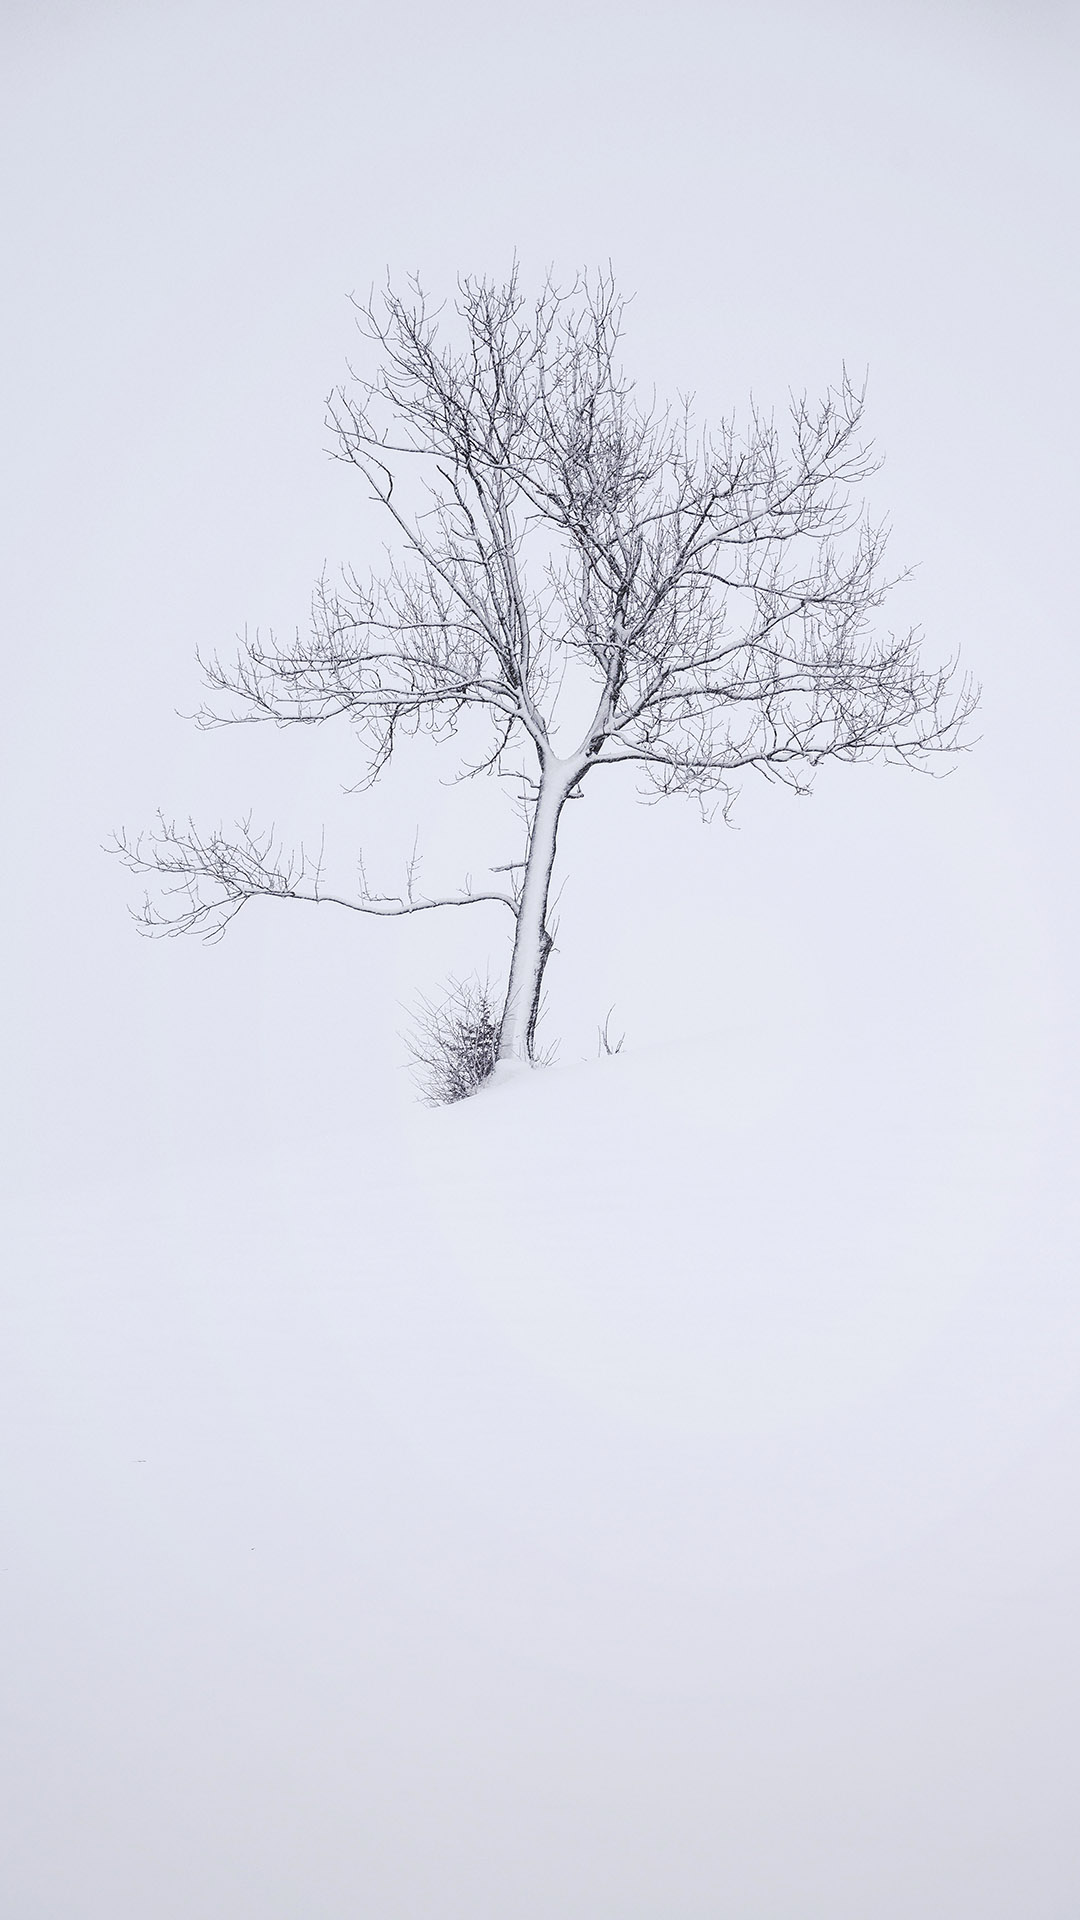 Dreamy Pixel. Free iPhone Wallpaper: Tree covered in snow